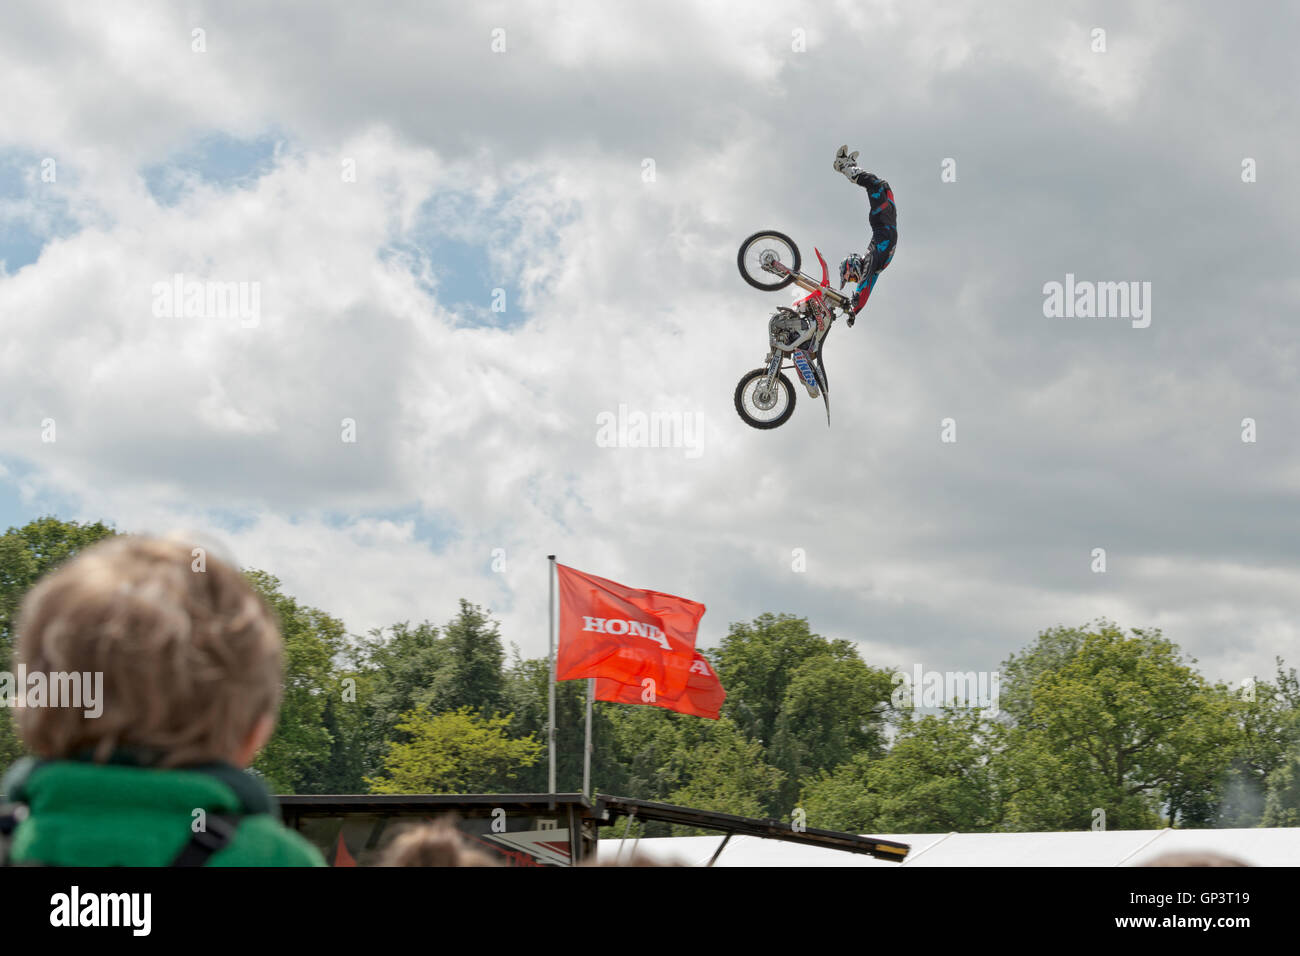 Stunt motorcyclist in mid-air Stock Photo